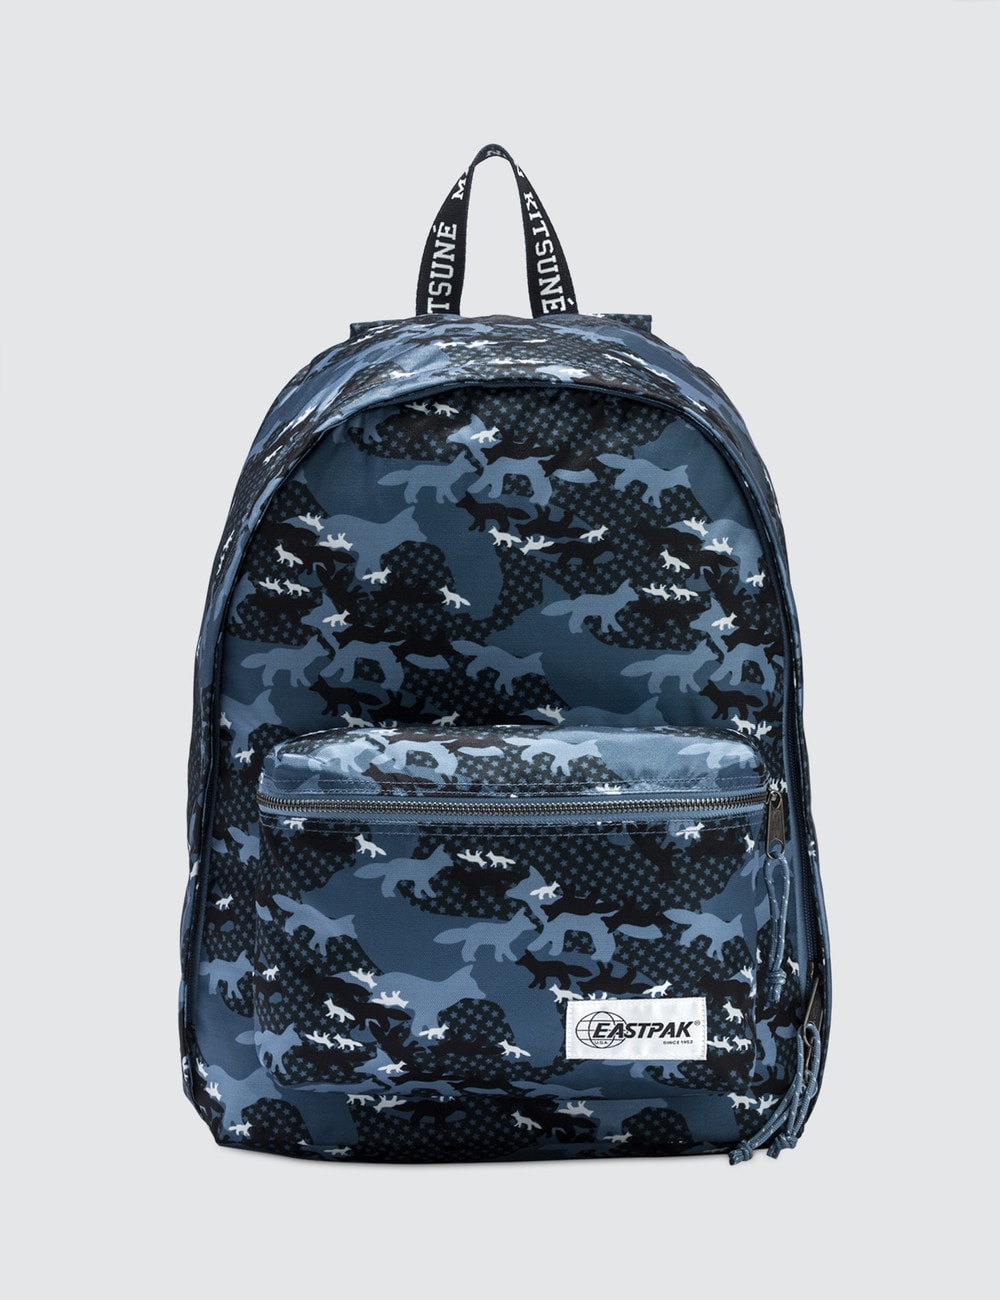 Maison Kitsuné - Maison Eastpak Back To Work Backpack | HBX - Globally Curated Fashion and by Hypebeast